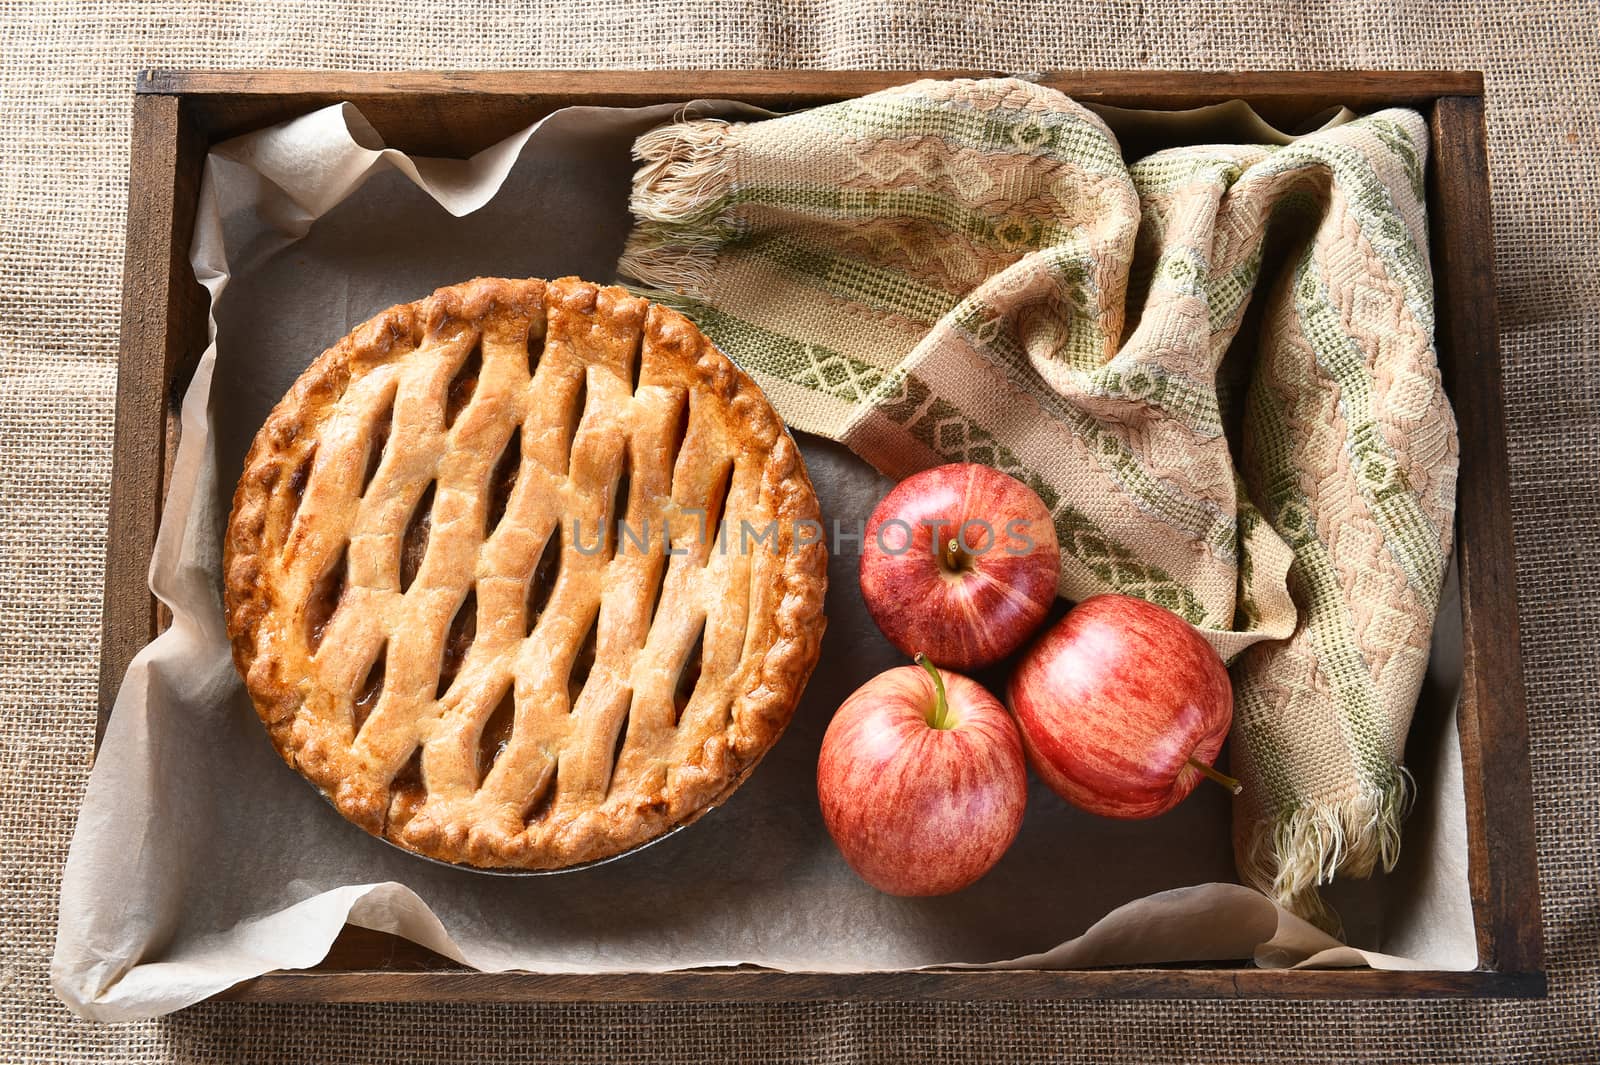 High angle view of a fresh baked apple pie and apples in a wood box on burlap surface.